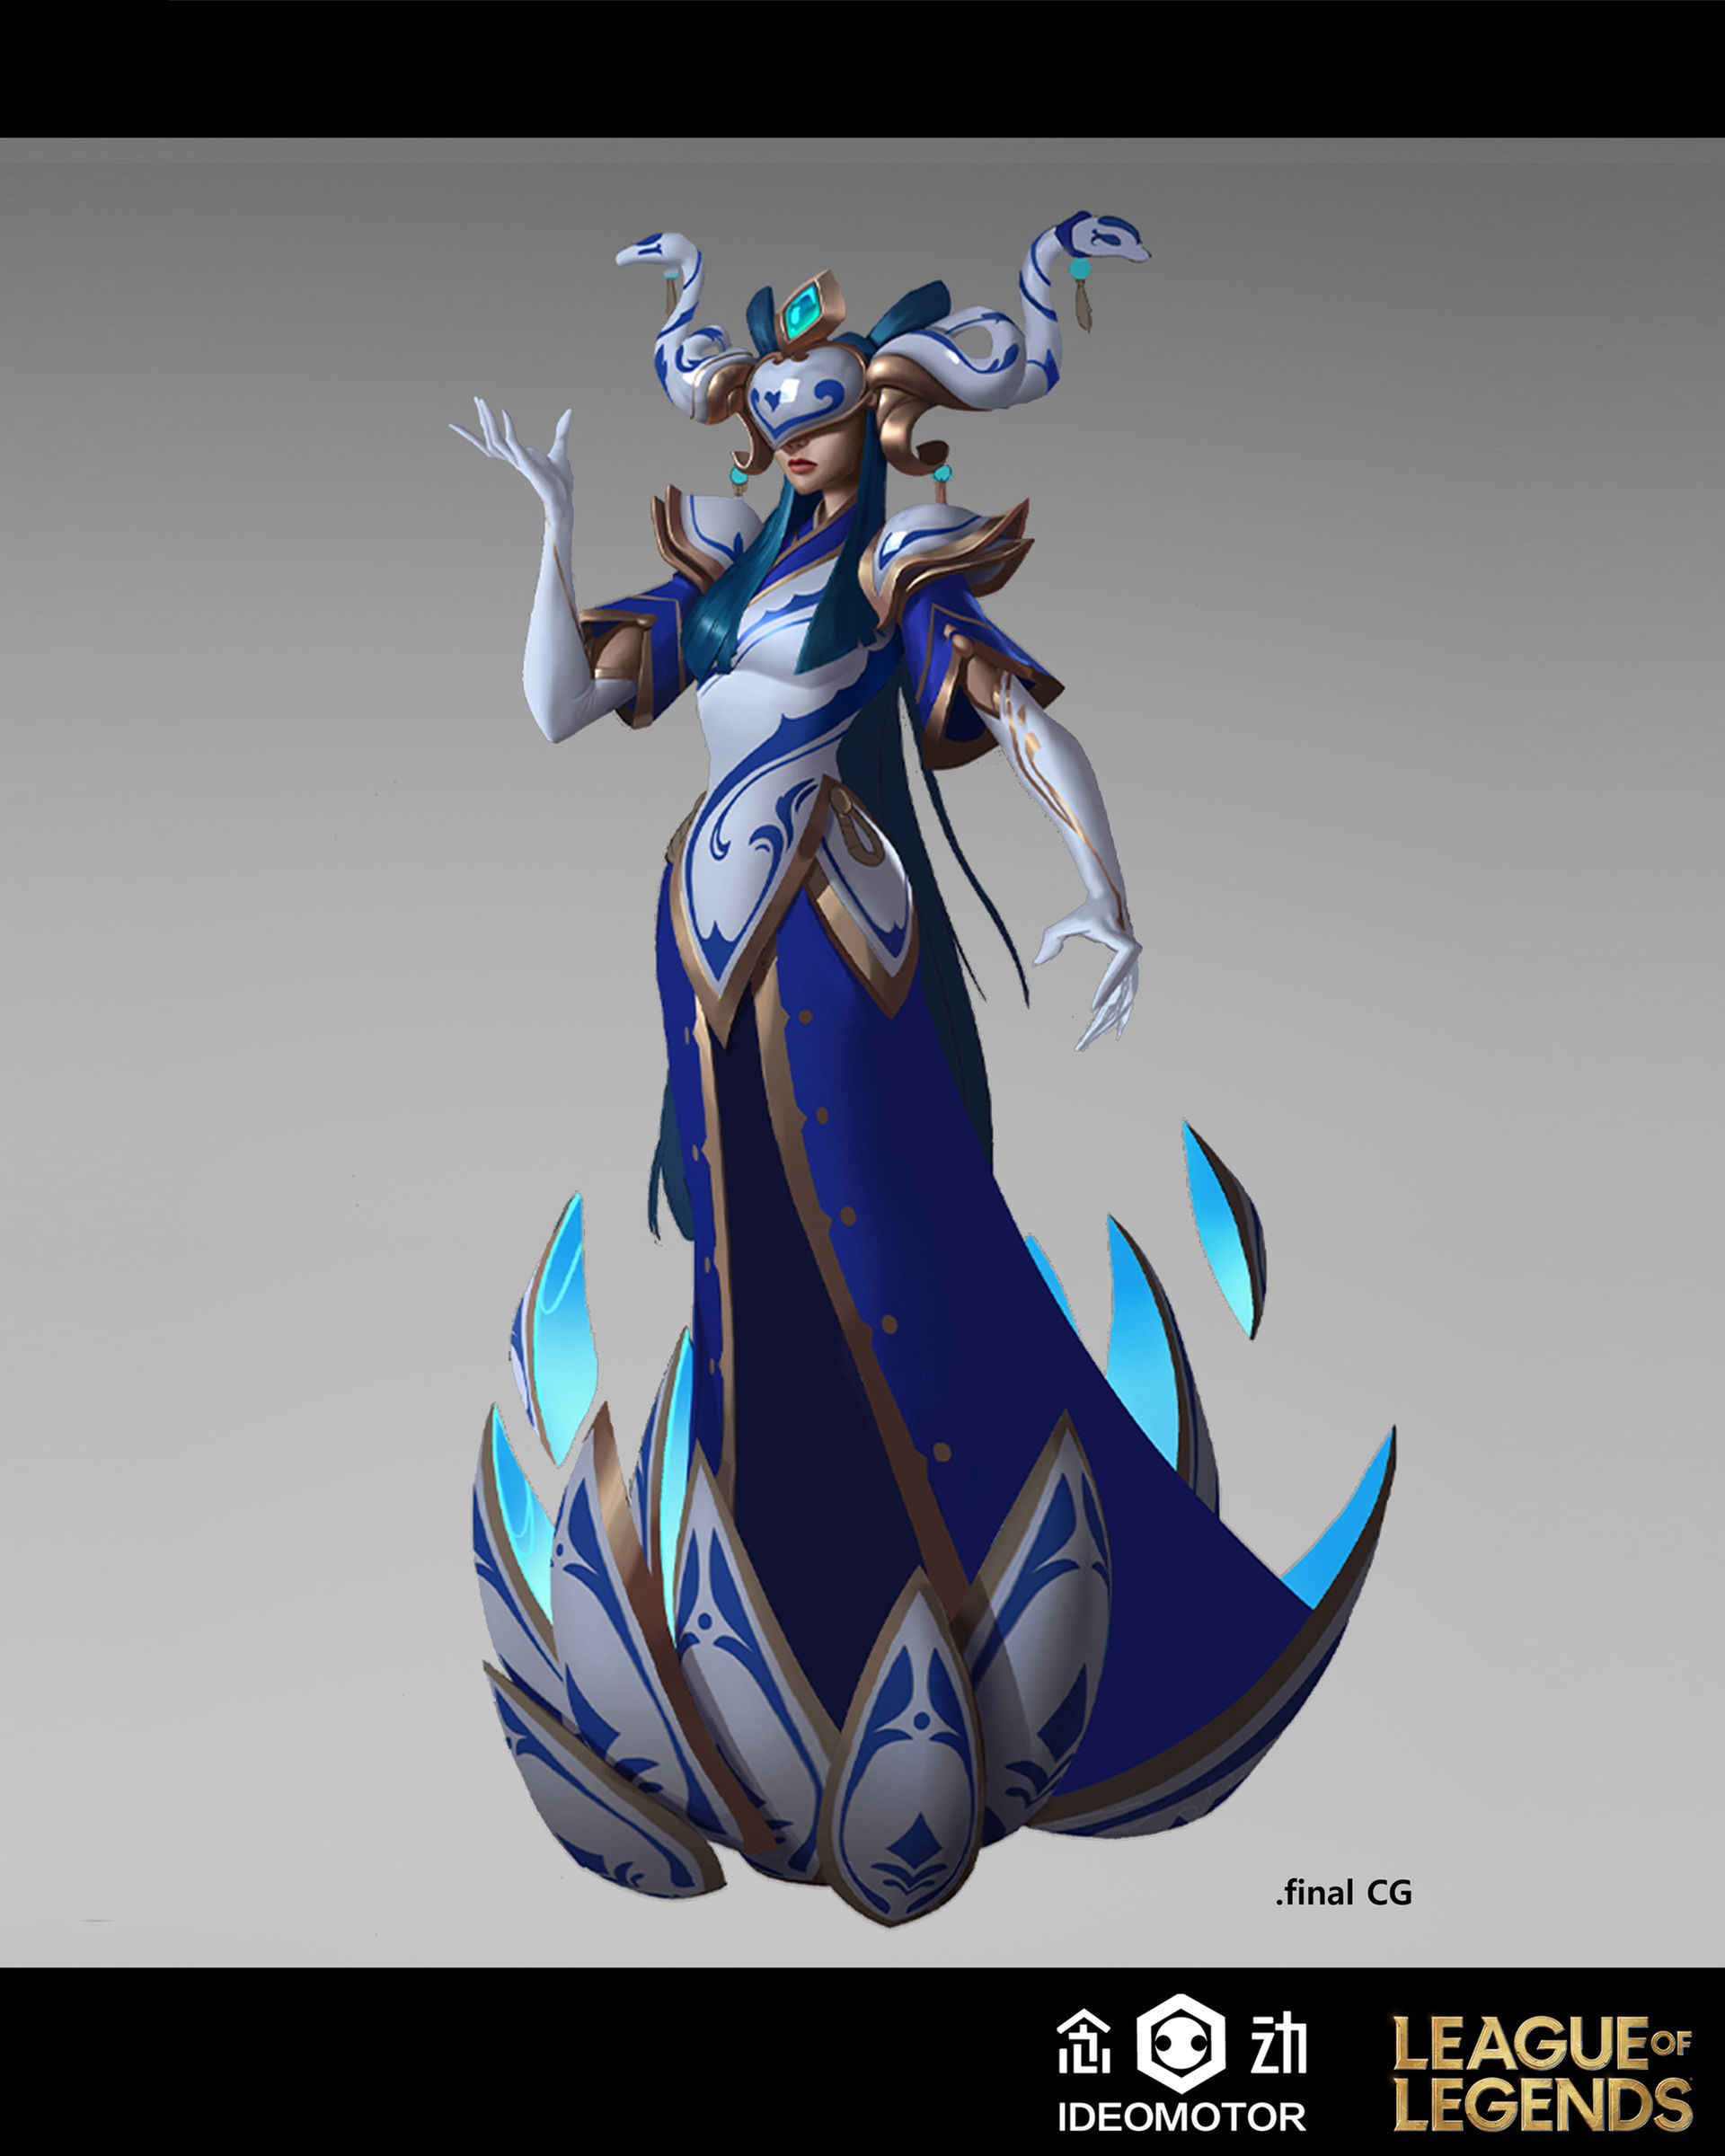 ♥『League of Legends』♥ — FPX Team Skins Concepts by 长御MRQ